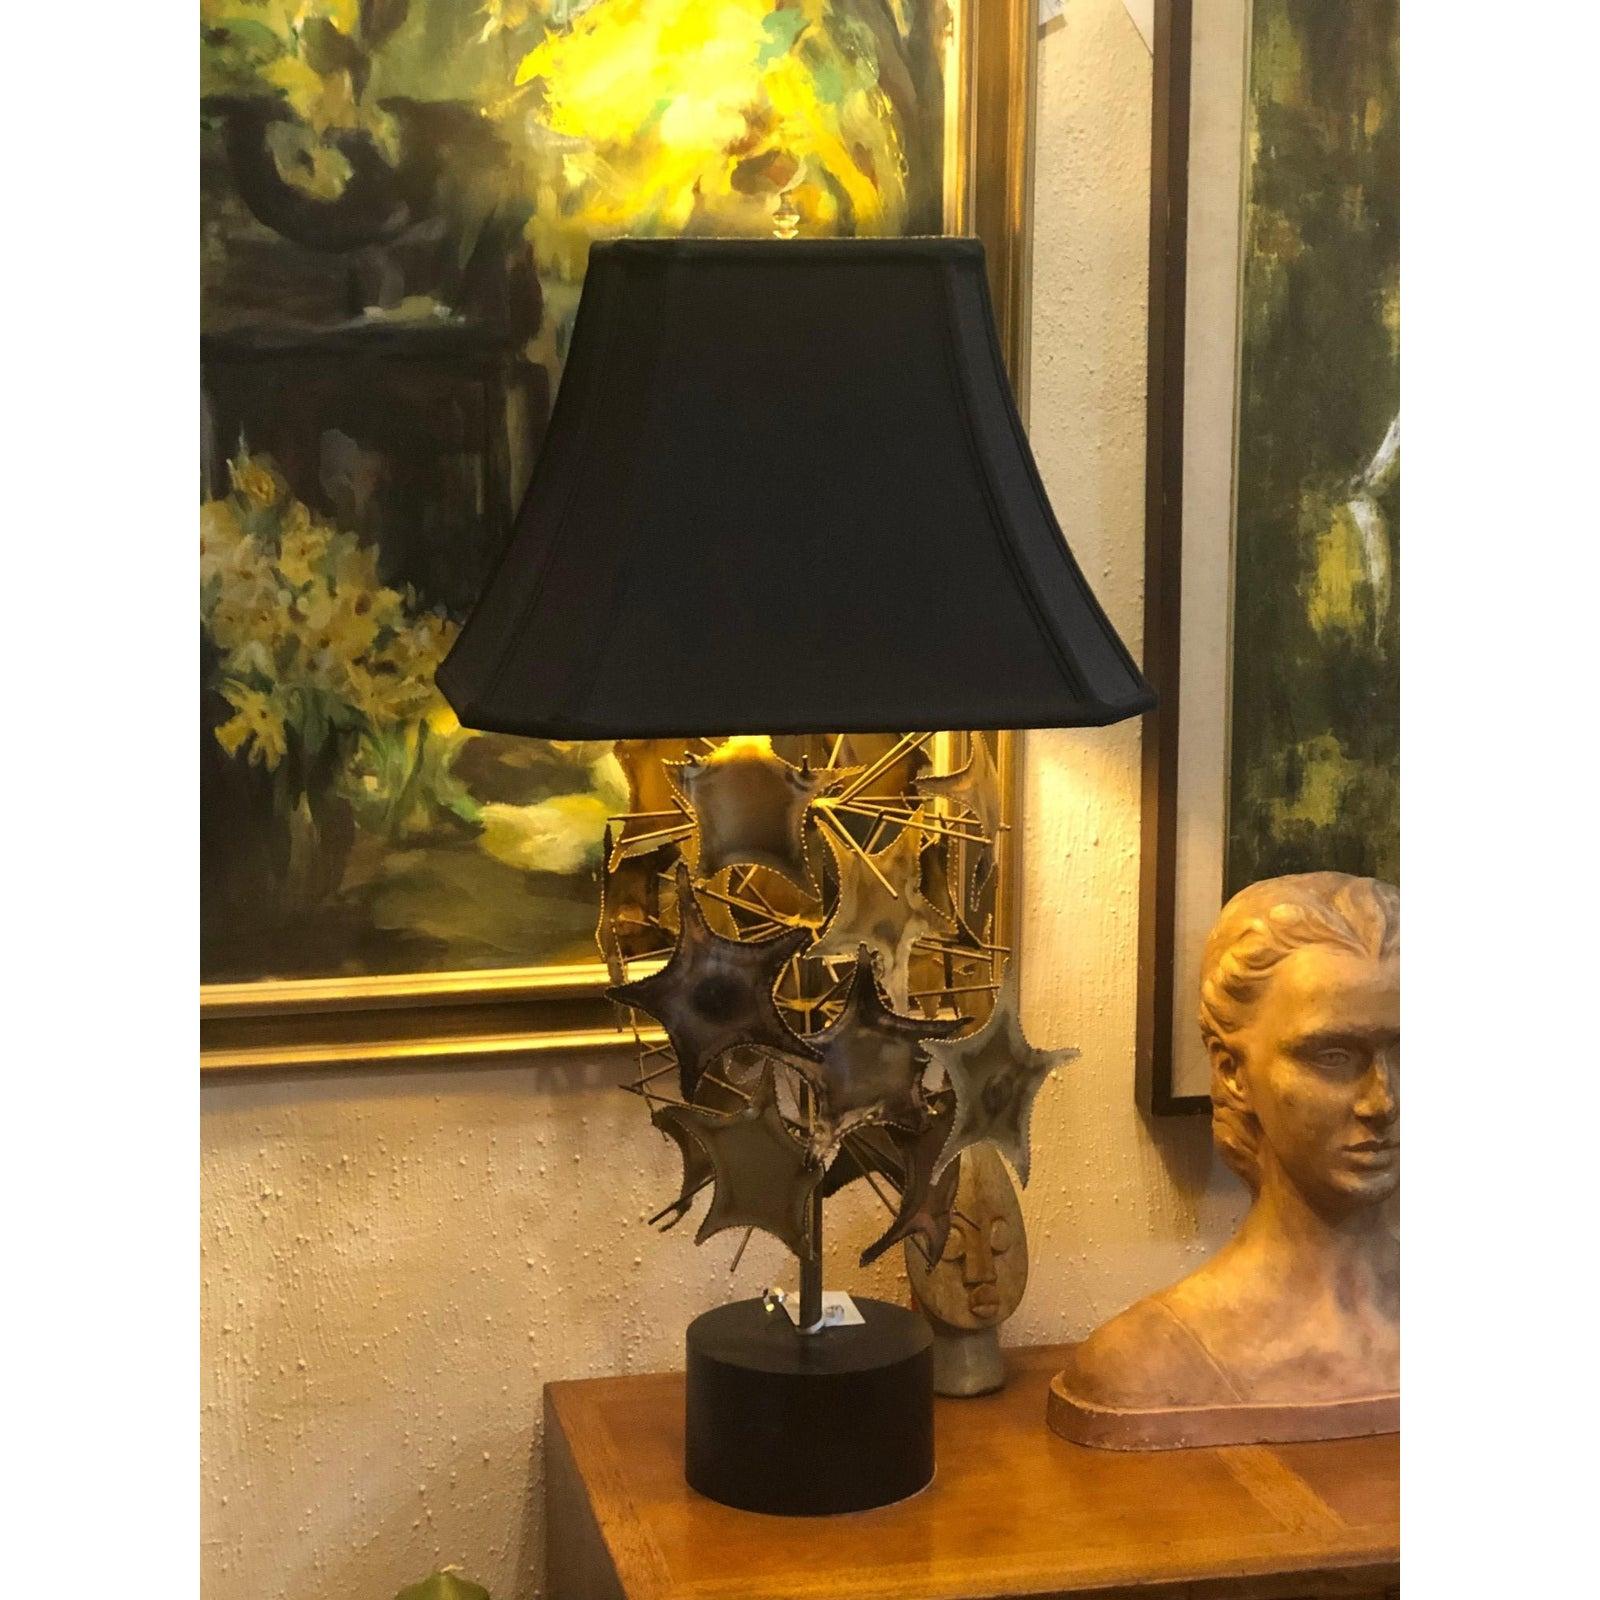 Brutalist Mid-Century lamp in the style of Curtis Jere. Torch cut shapes of stars and branches or starfish and sea urchin-line tentacles. Supported by a round black metal base. Comes with a black silk shade, swithc out for a round black one if